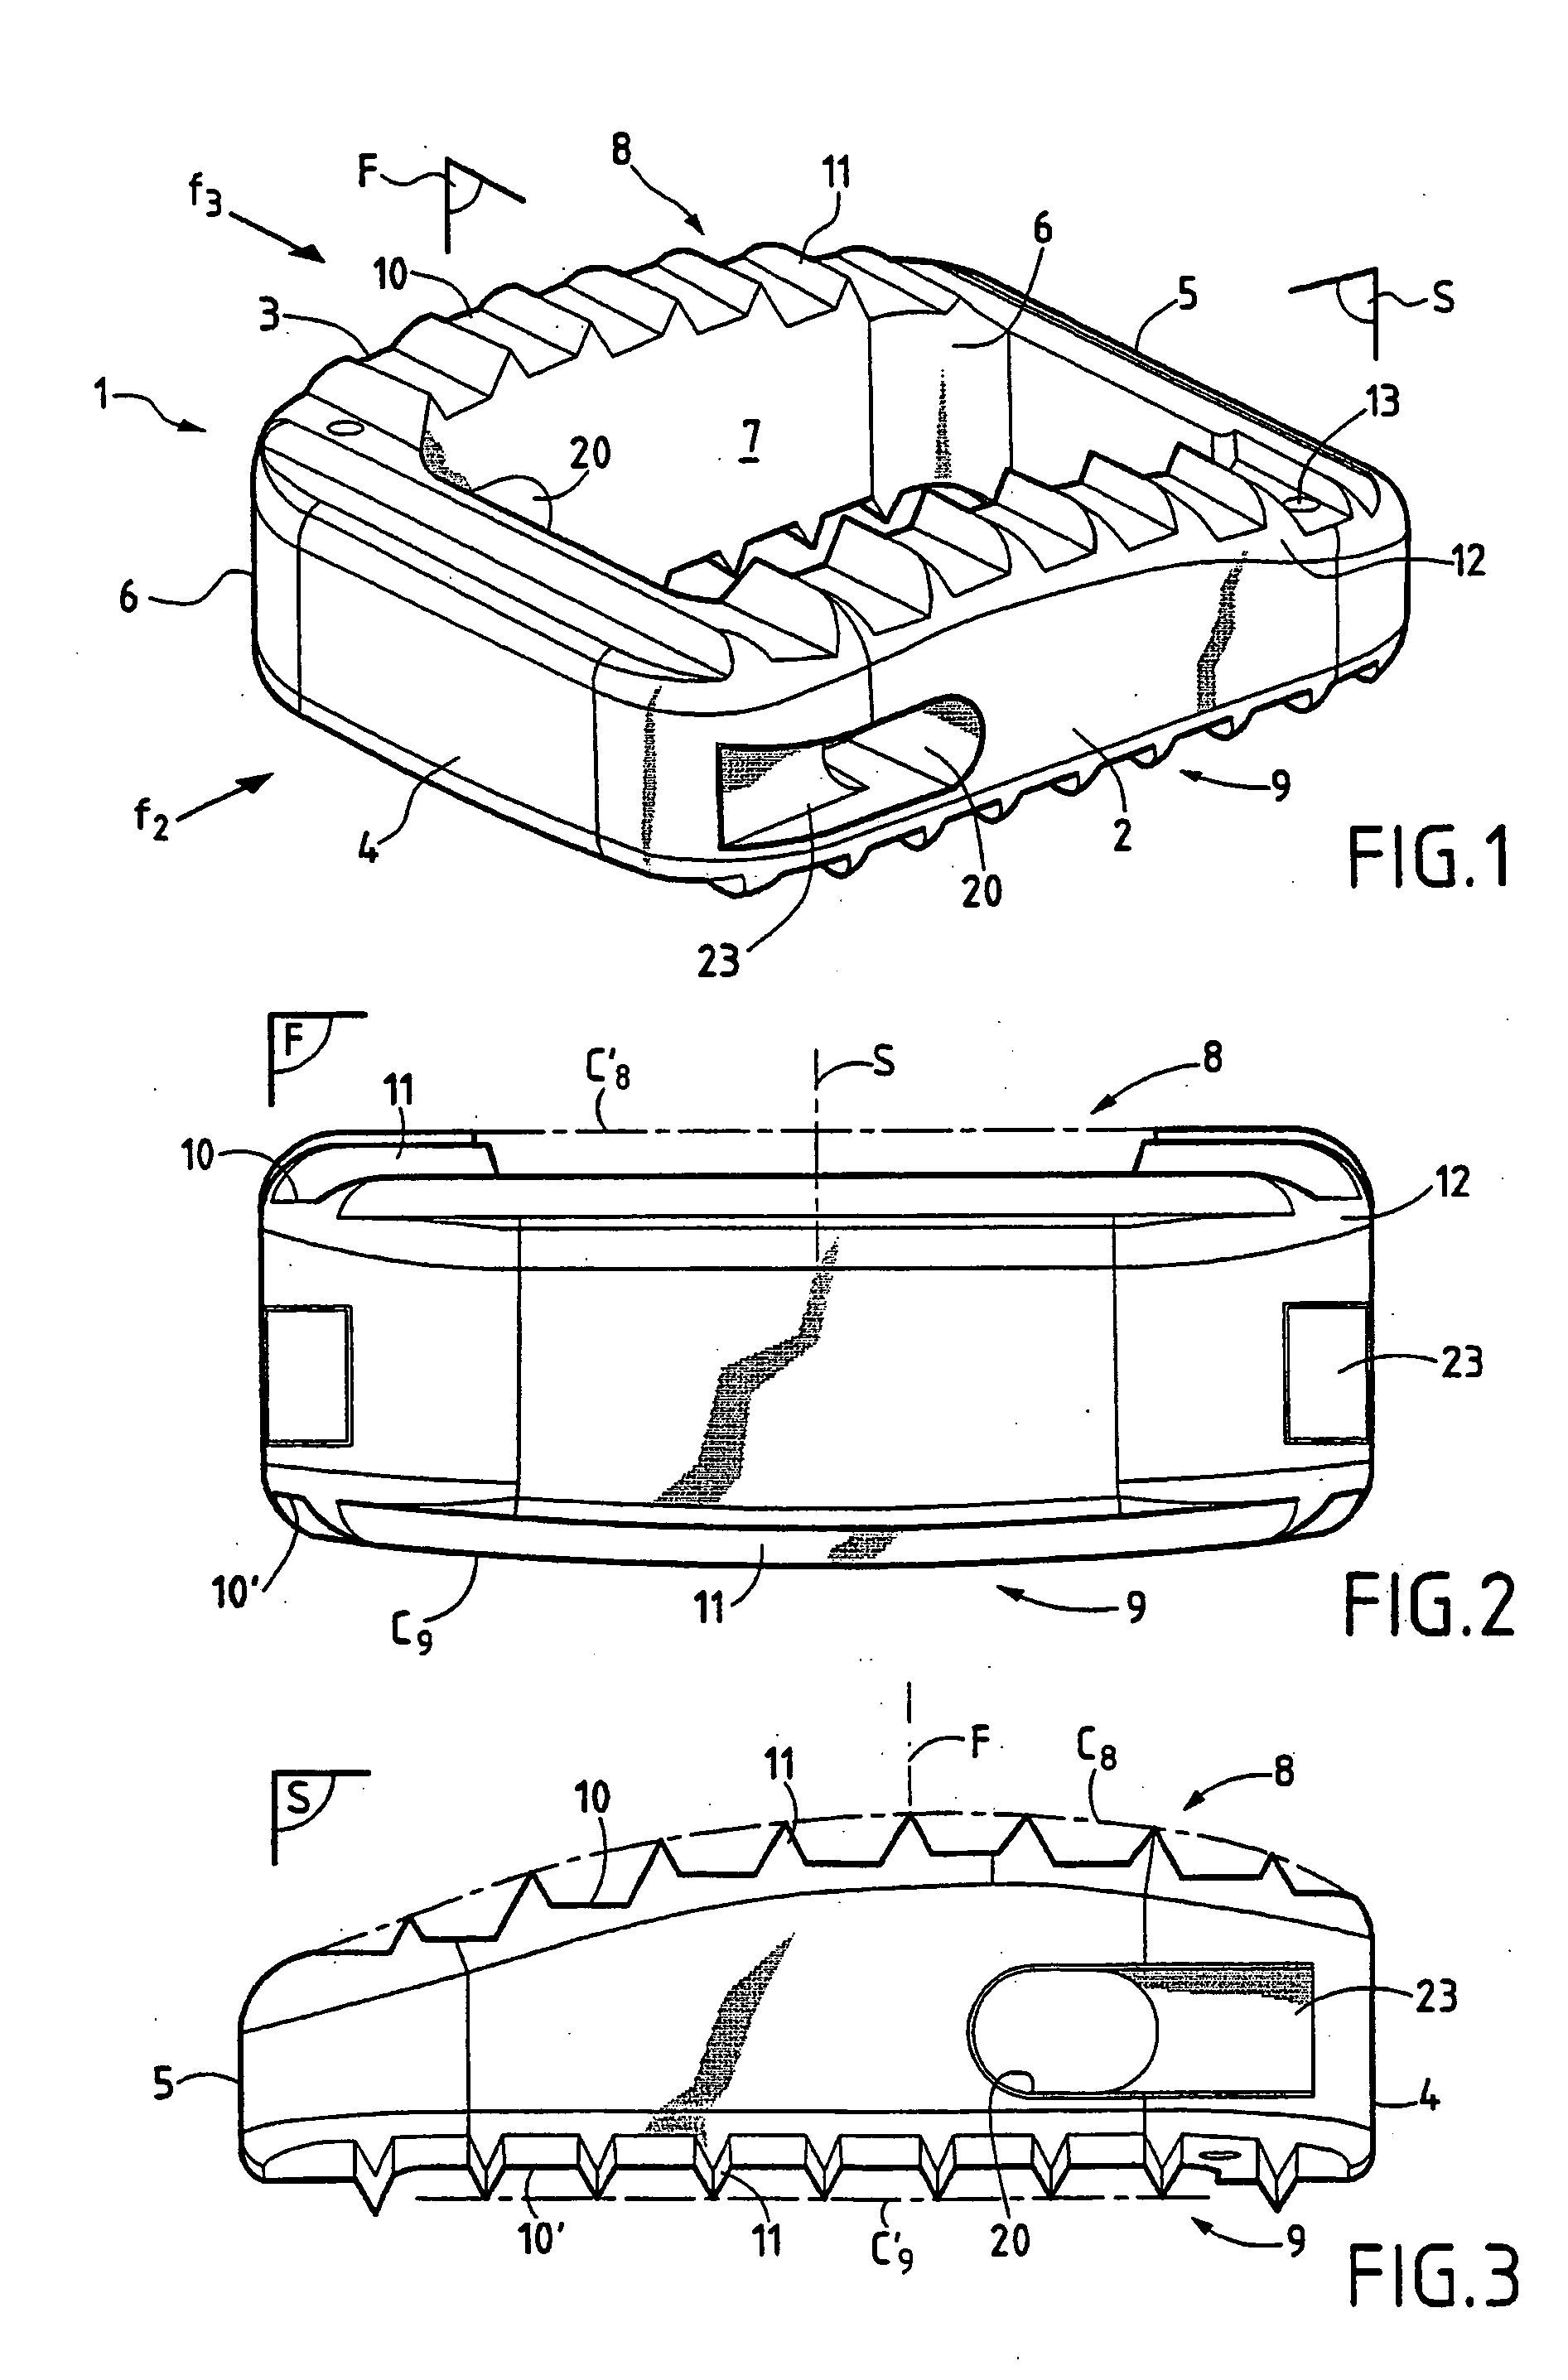 Anatomical interbody implant and gripper for same